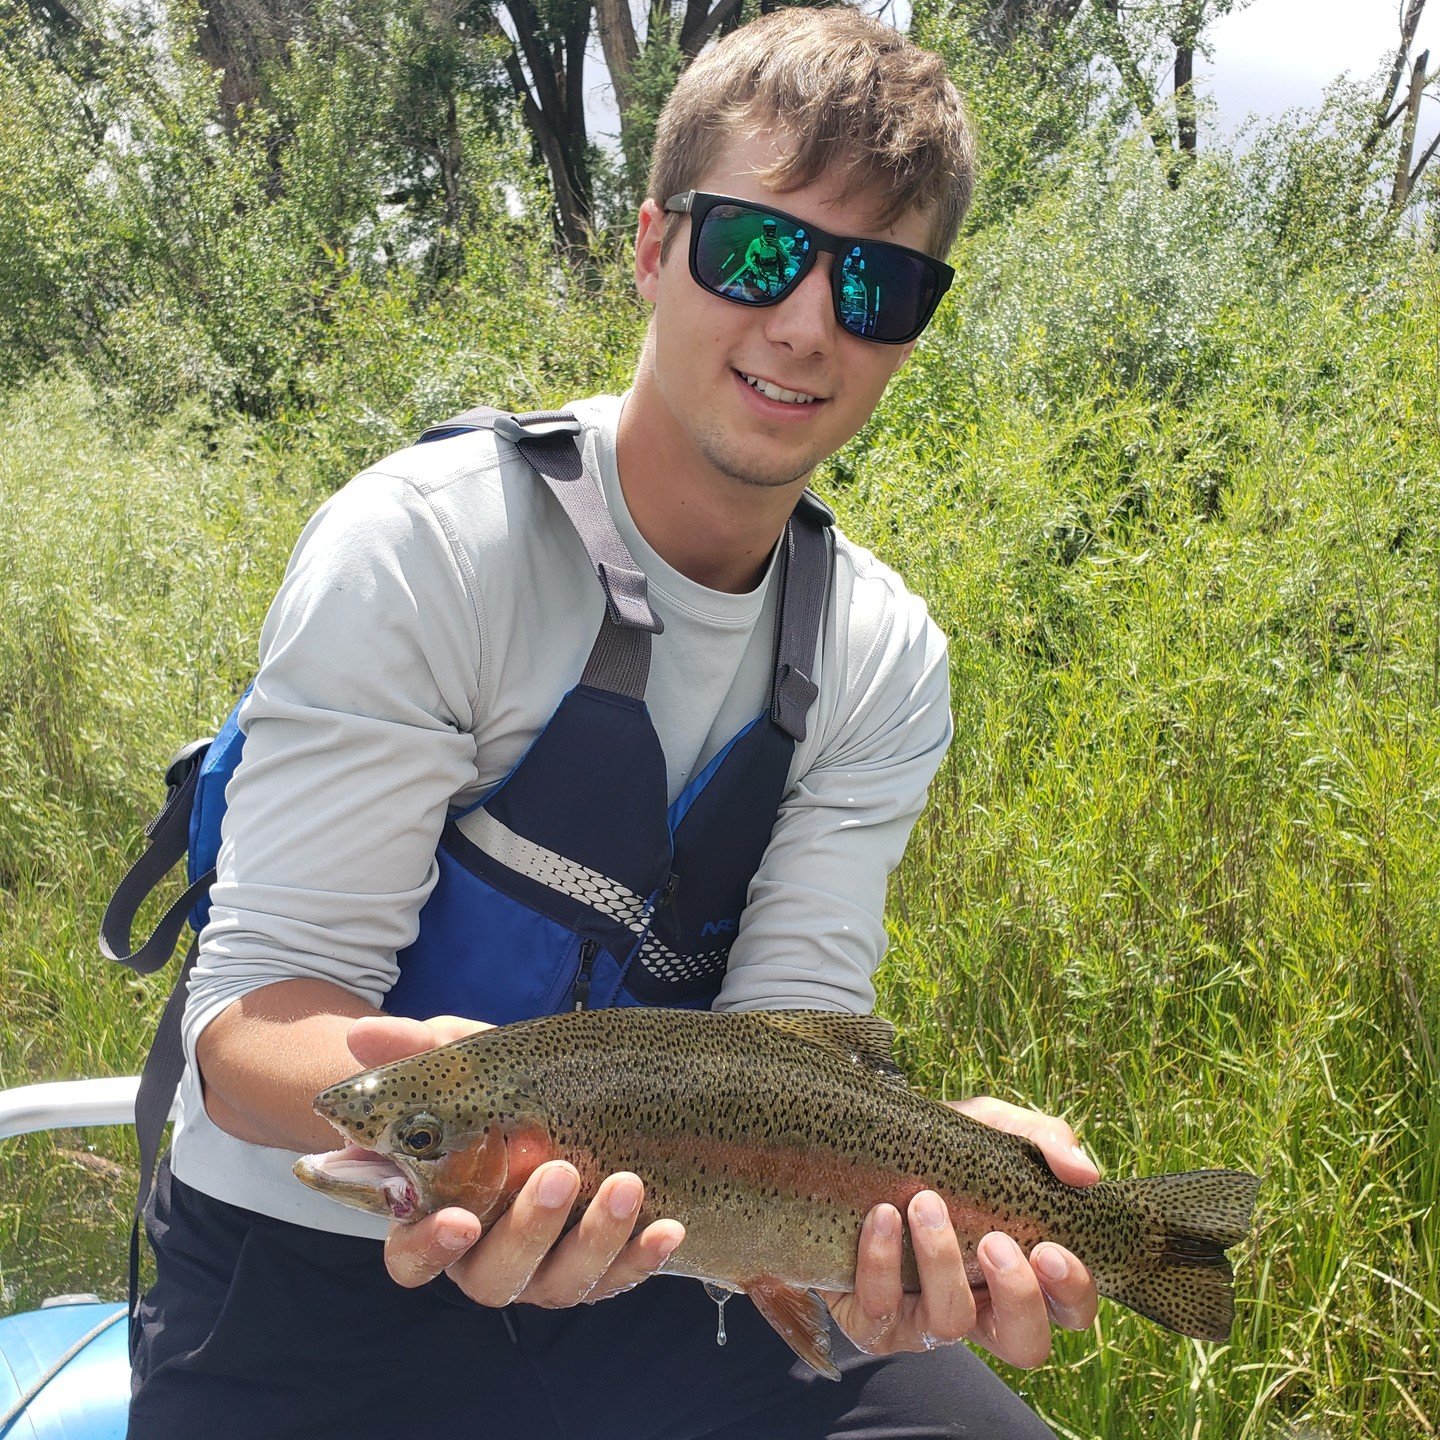 Fishing is heating up!! This is one of our favorite times of year to be on the water... Call to book your trip today!!! 

(970)-485-2093

www.stoneflyangler.com
.
.
.
.
.
.
.
.
.
.
.
.

#flyfishing #flyfishingcolorado #guidetrip #gobreck #getoutside 